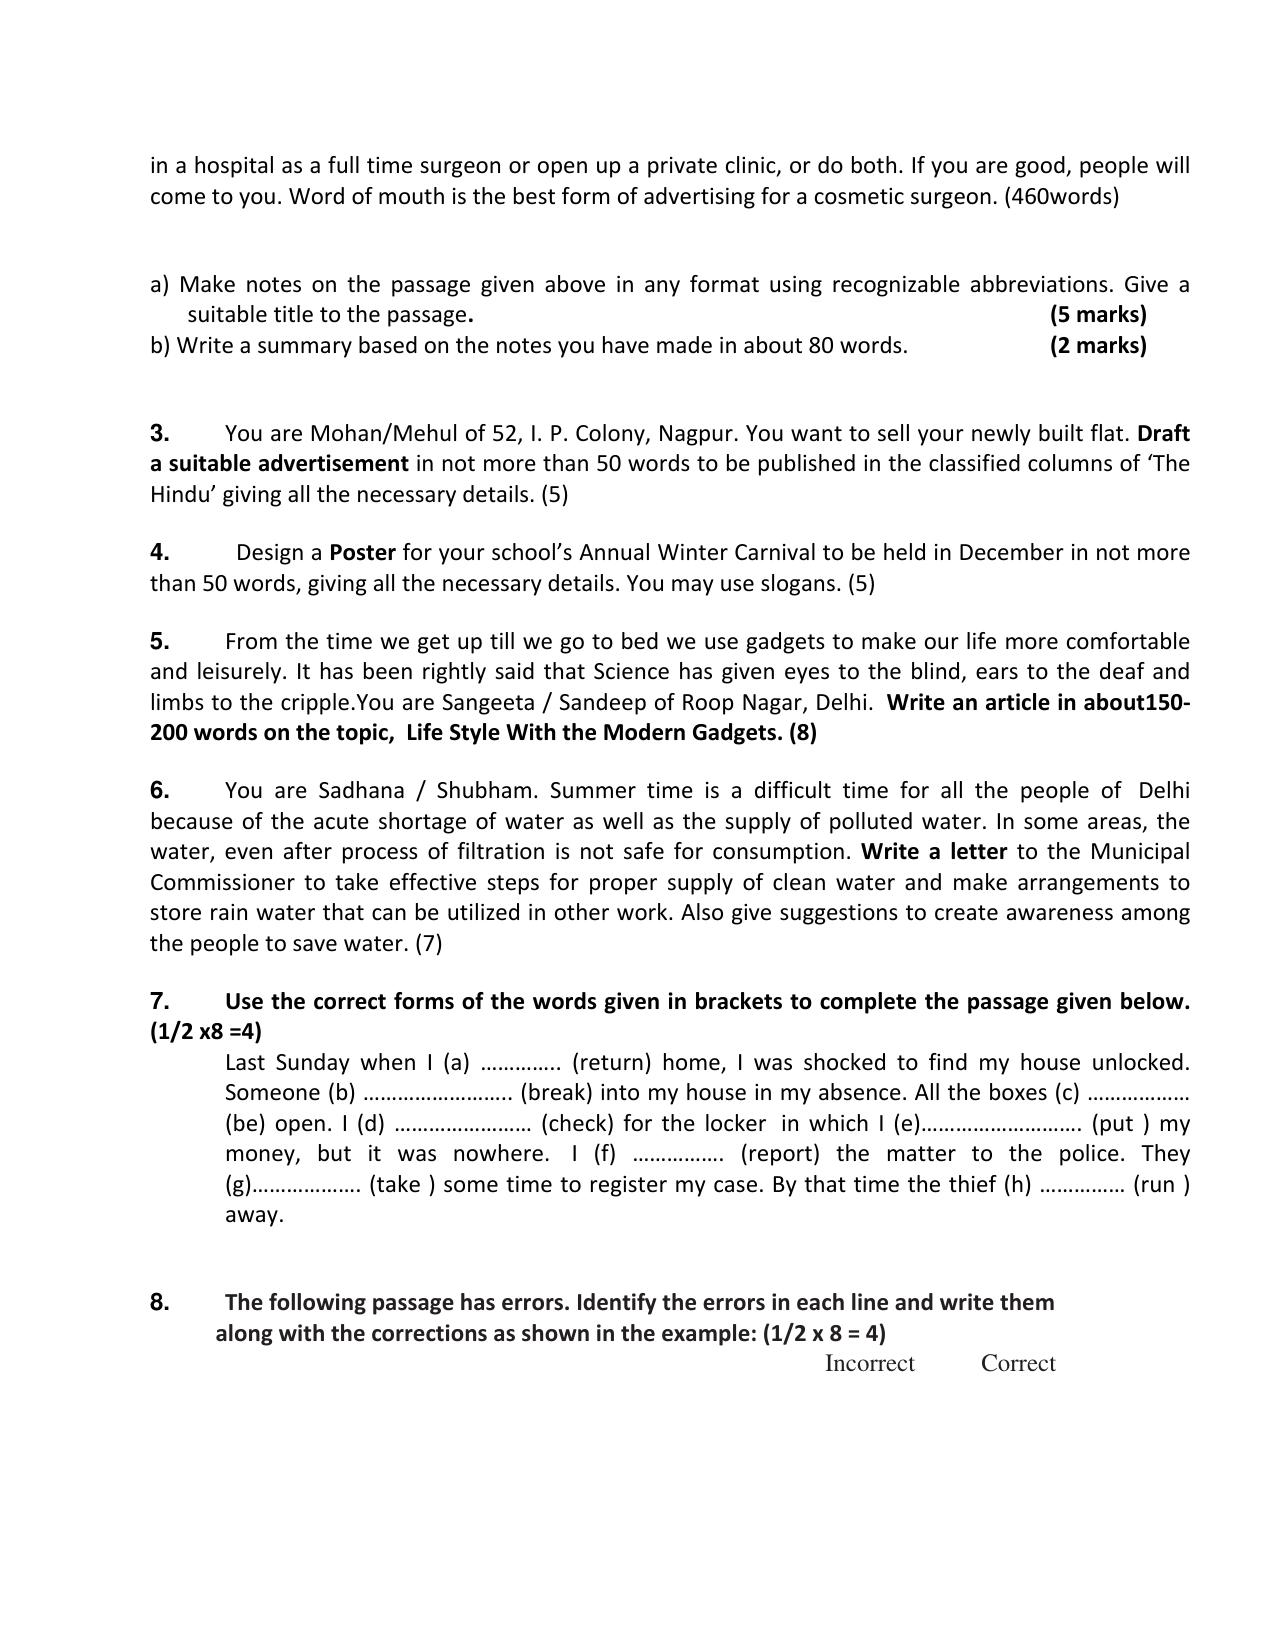 CBSE Worksheets for Class 11 English Assignment 1 - Page 4